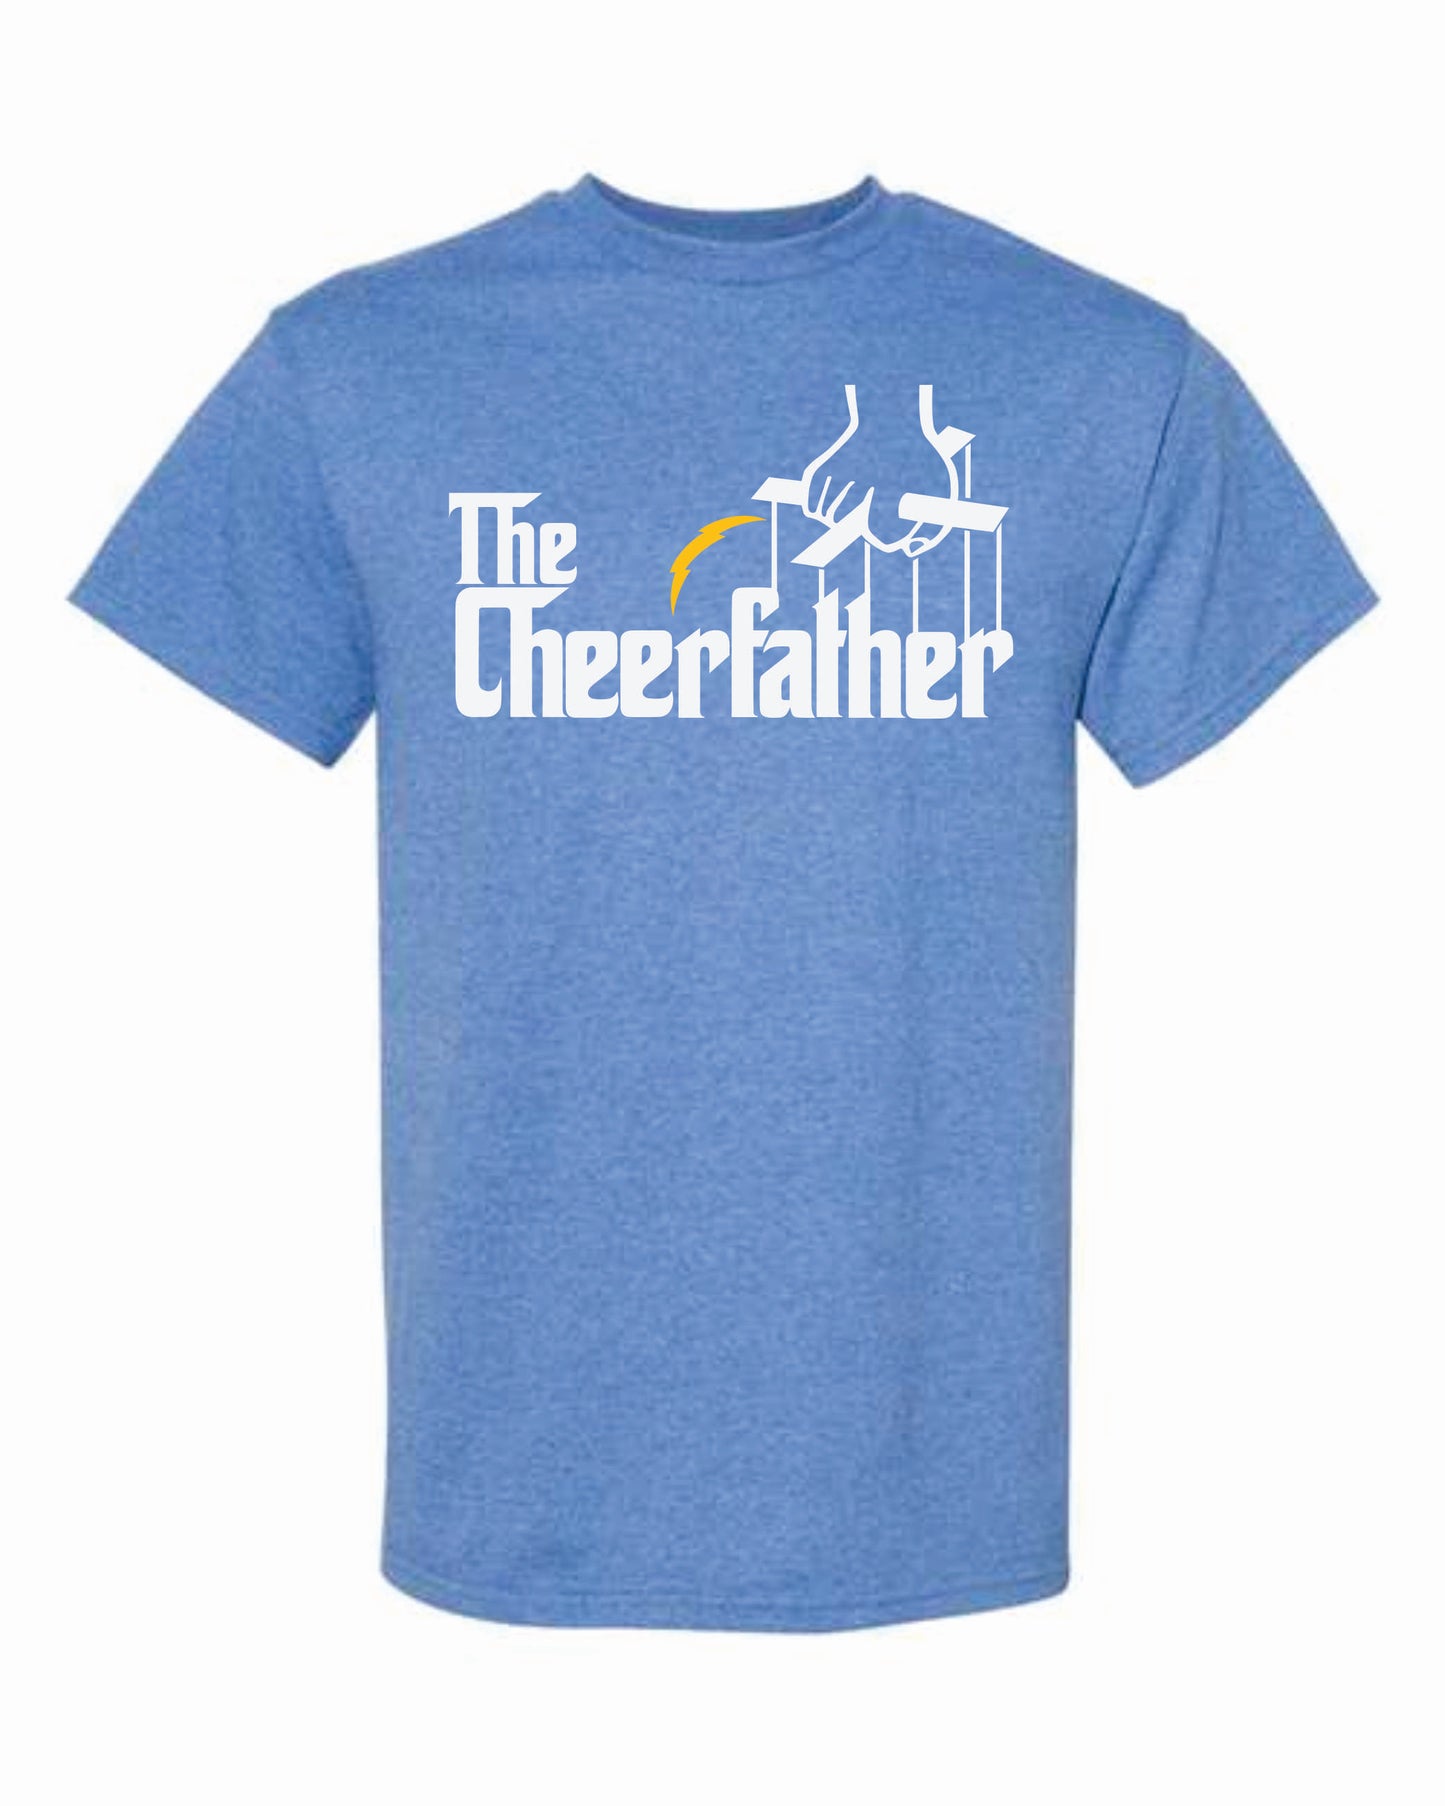 Manteca Chargers Cheer Father Tee